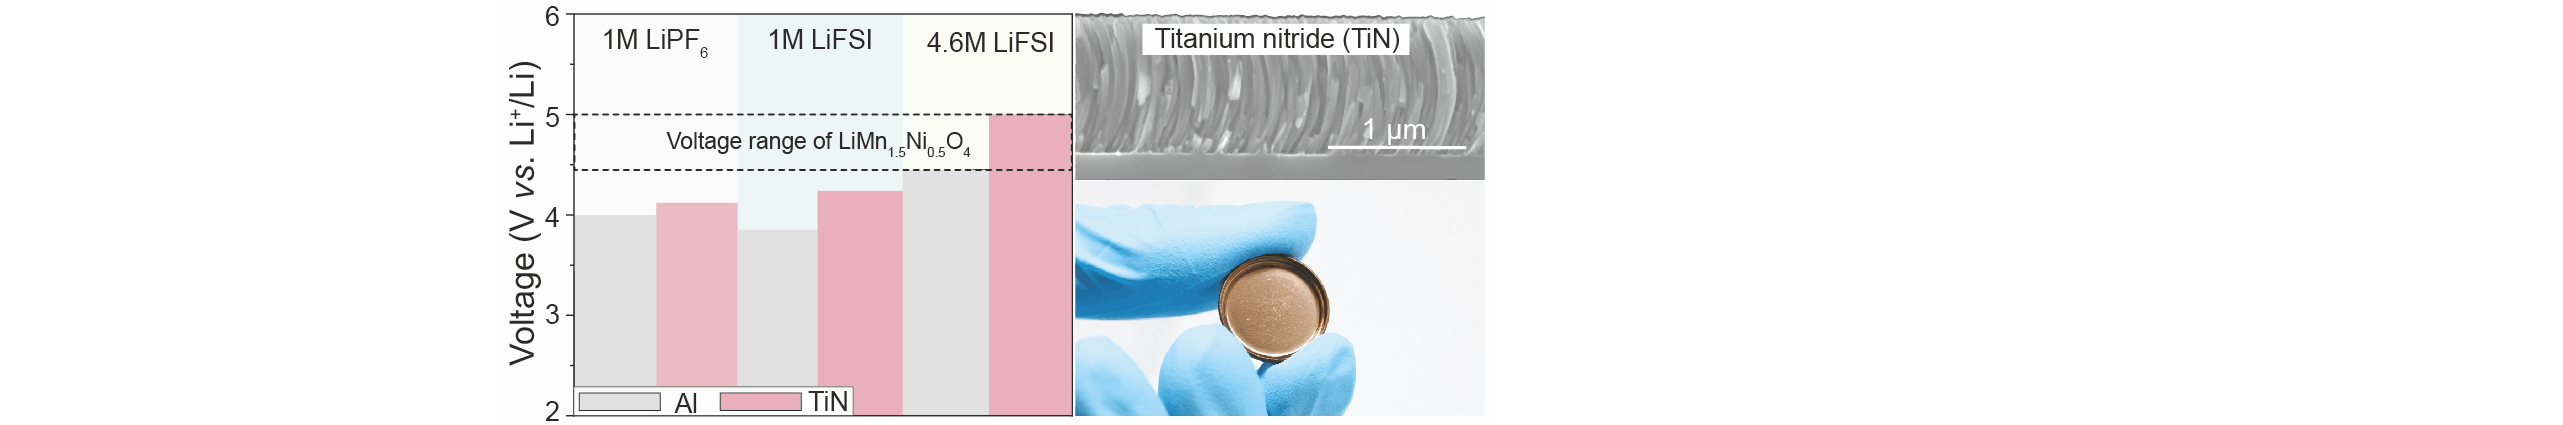 Overcoming the High-Voltage Limitations of Li-Ion Batteries using Titanium Nitride Current Collector